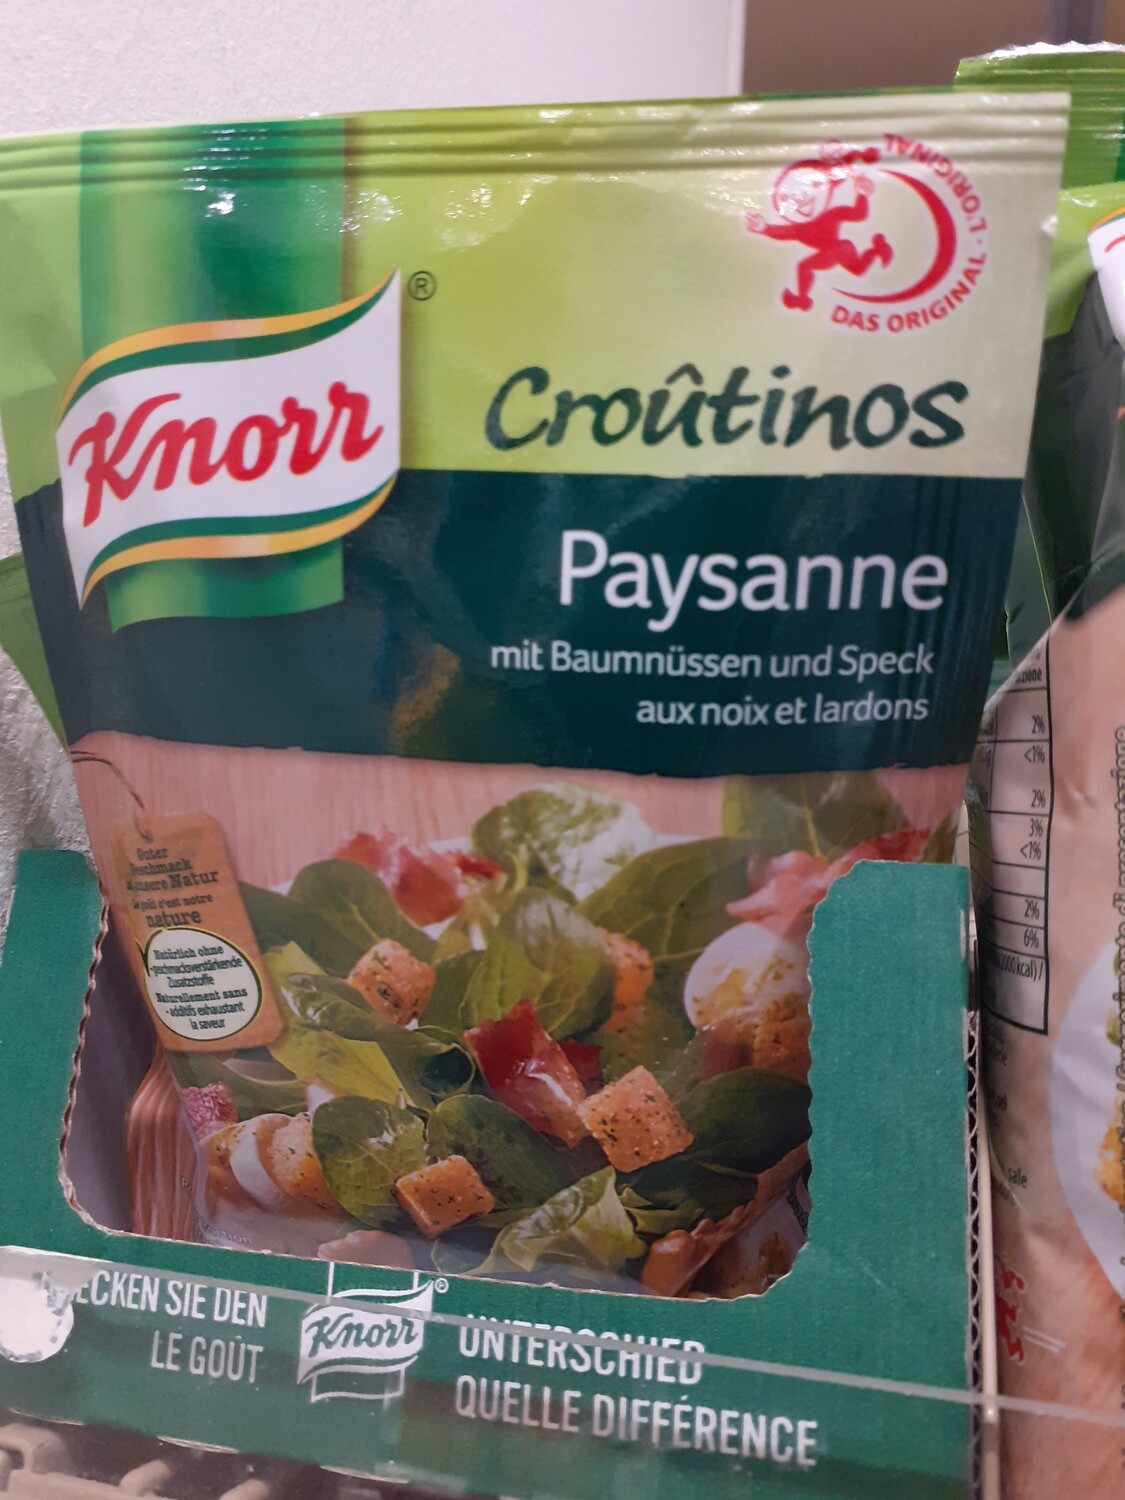 Knorr Croutinos paysanne 1x25g